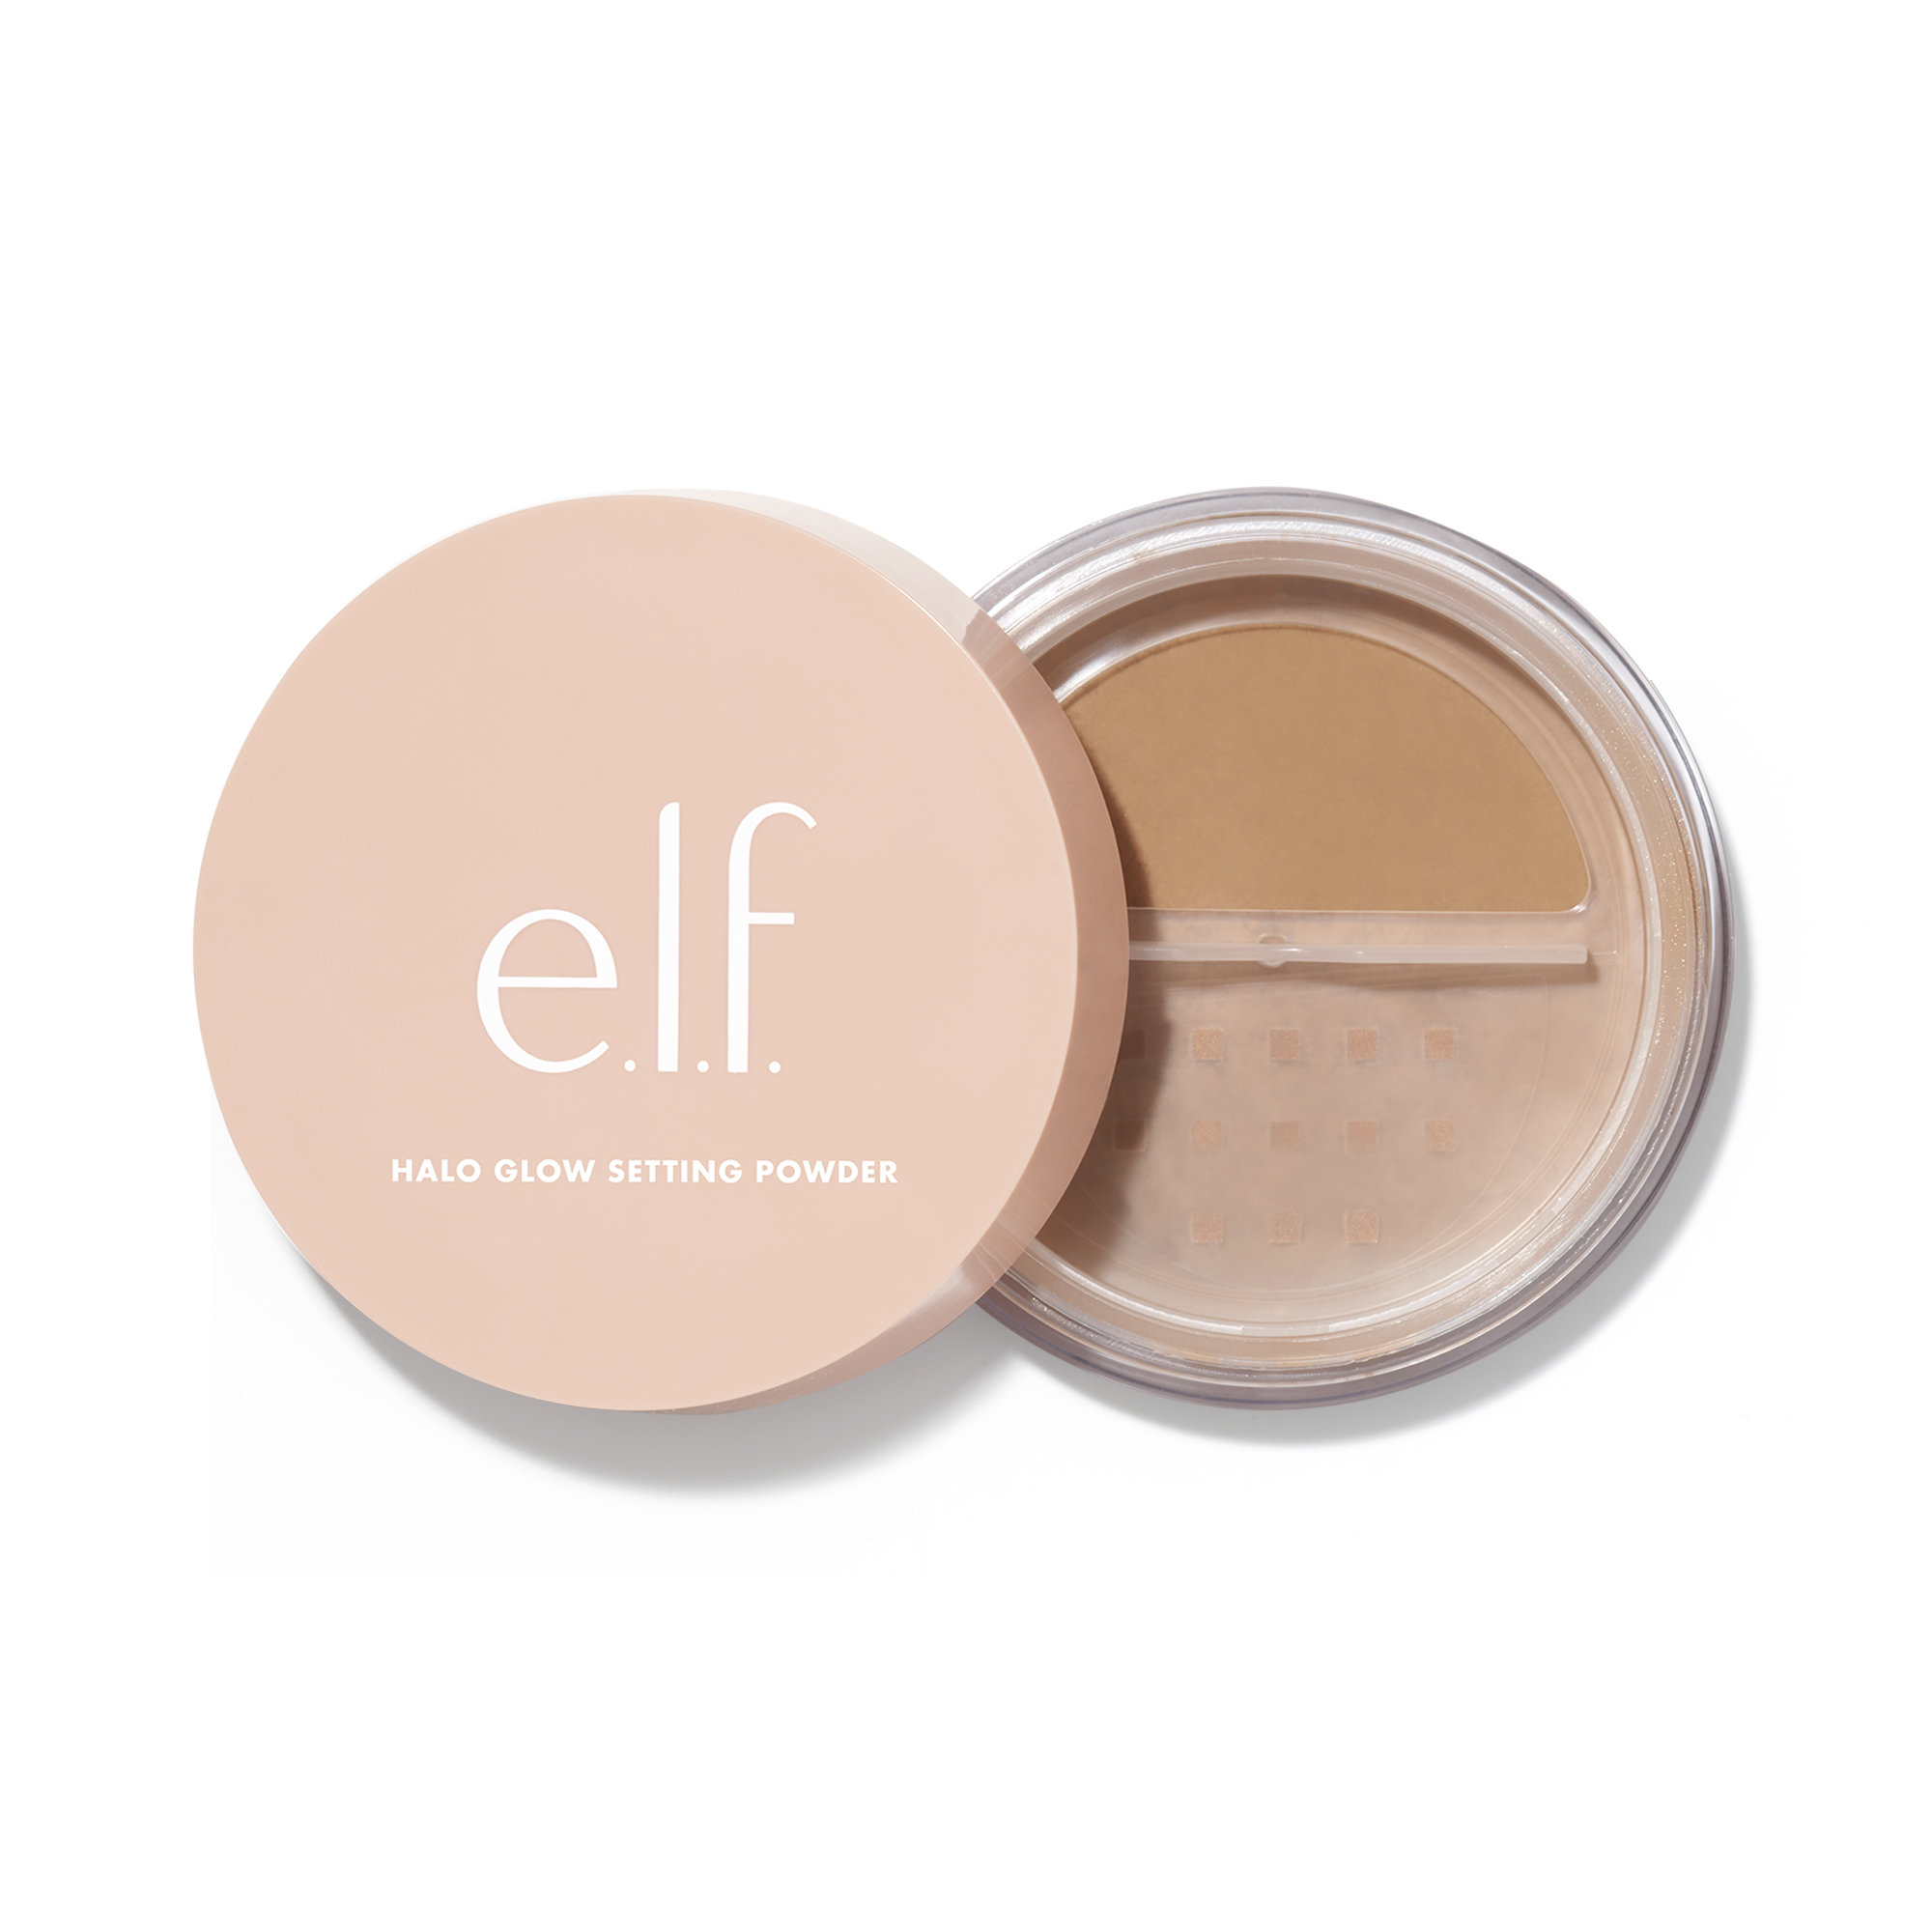 MAKE UP FOR EVER Standard Loose Face Powders for sale